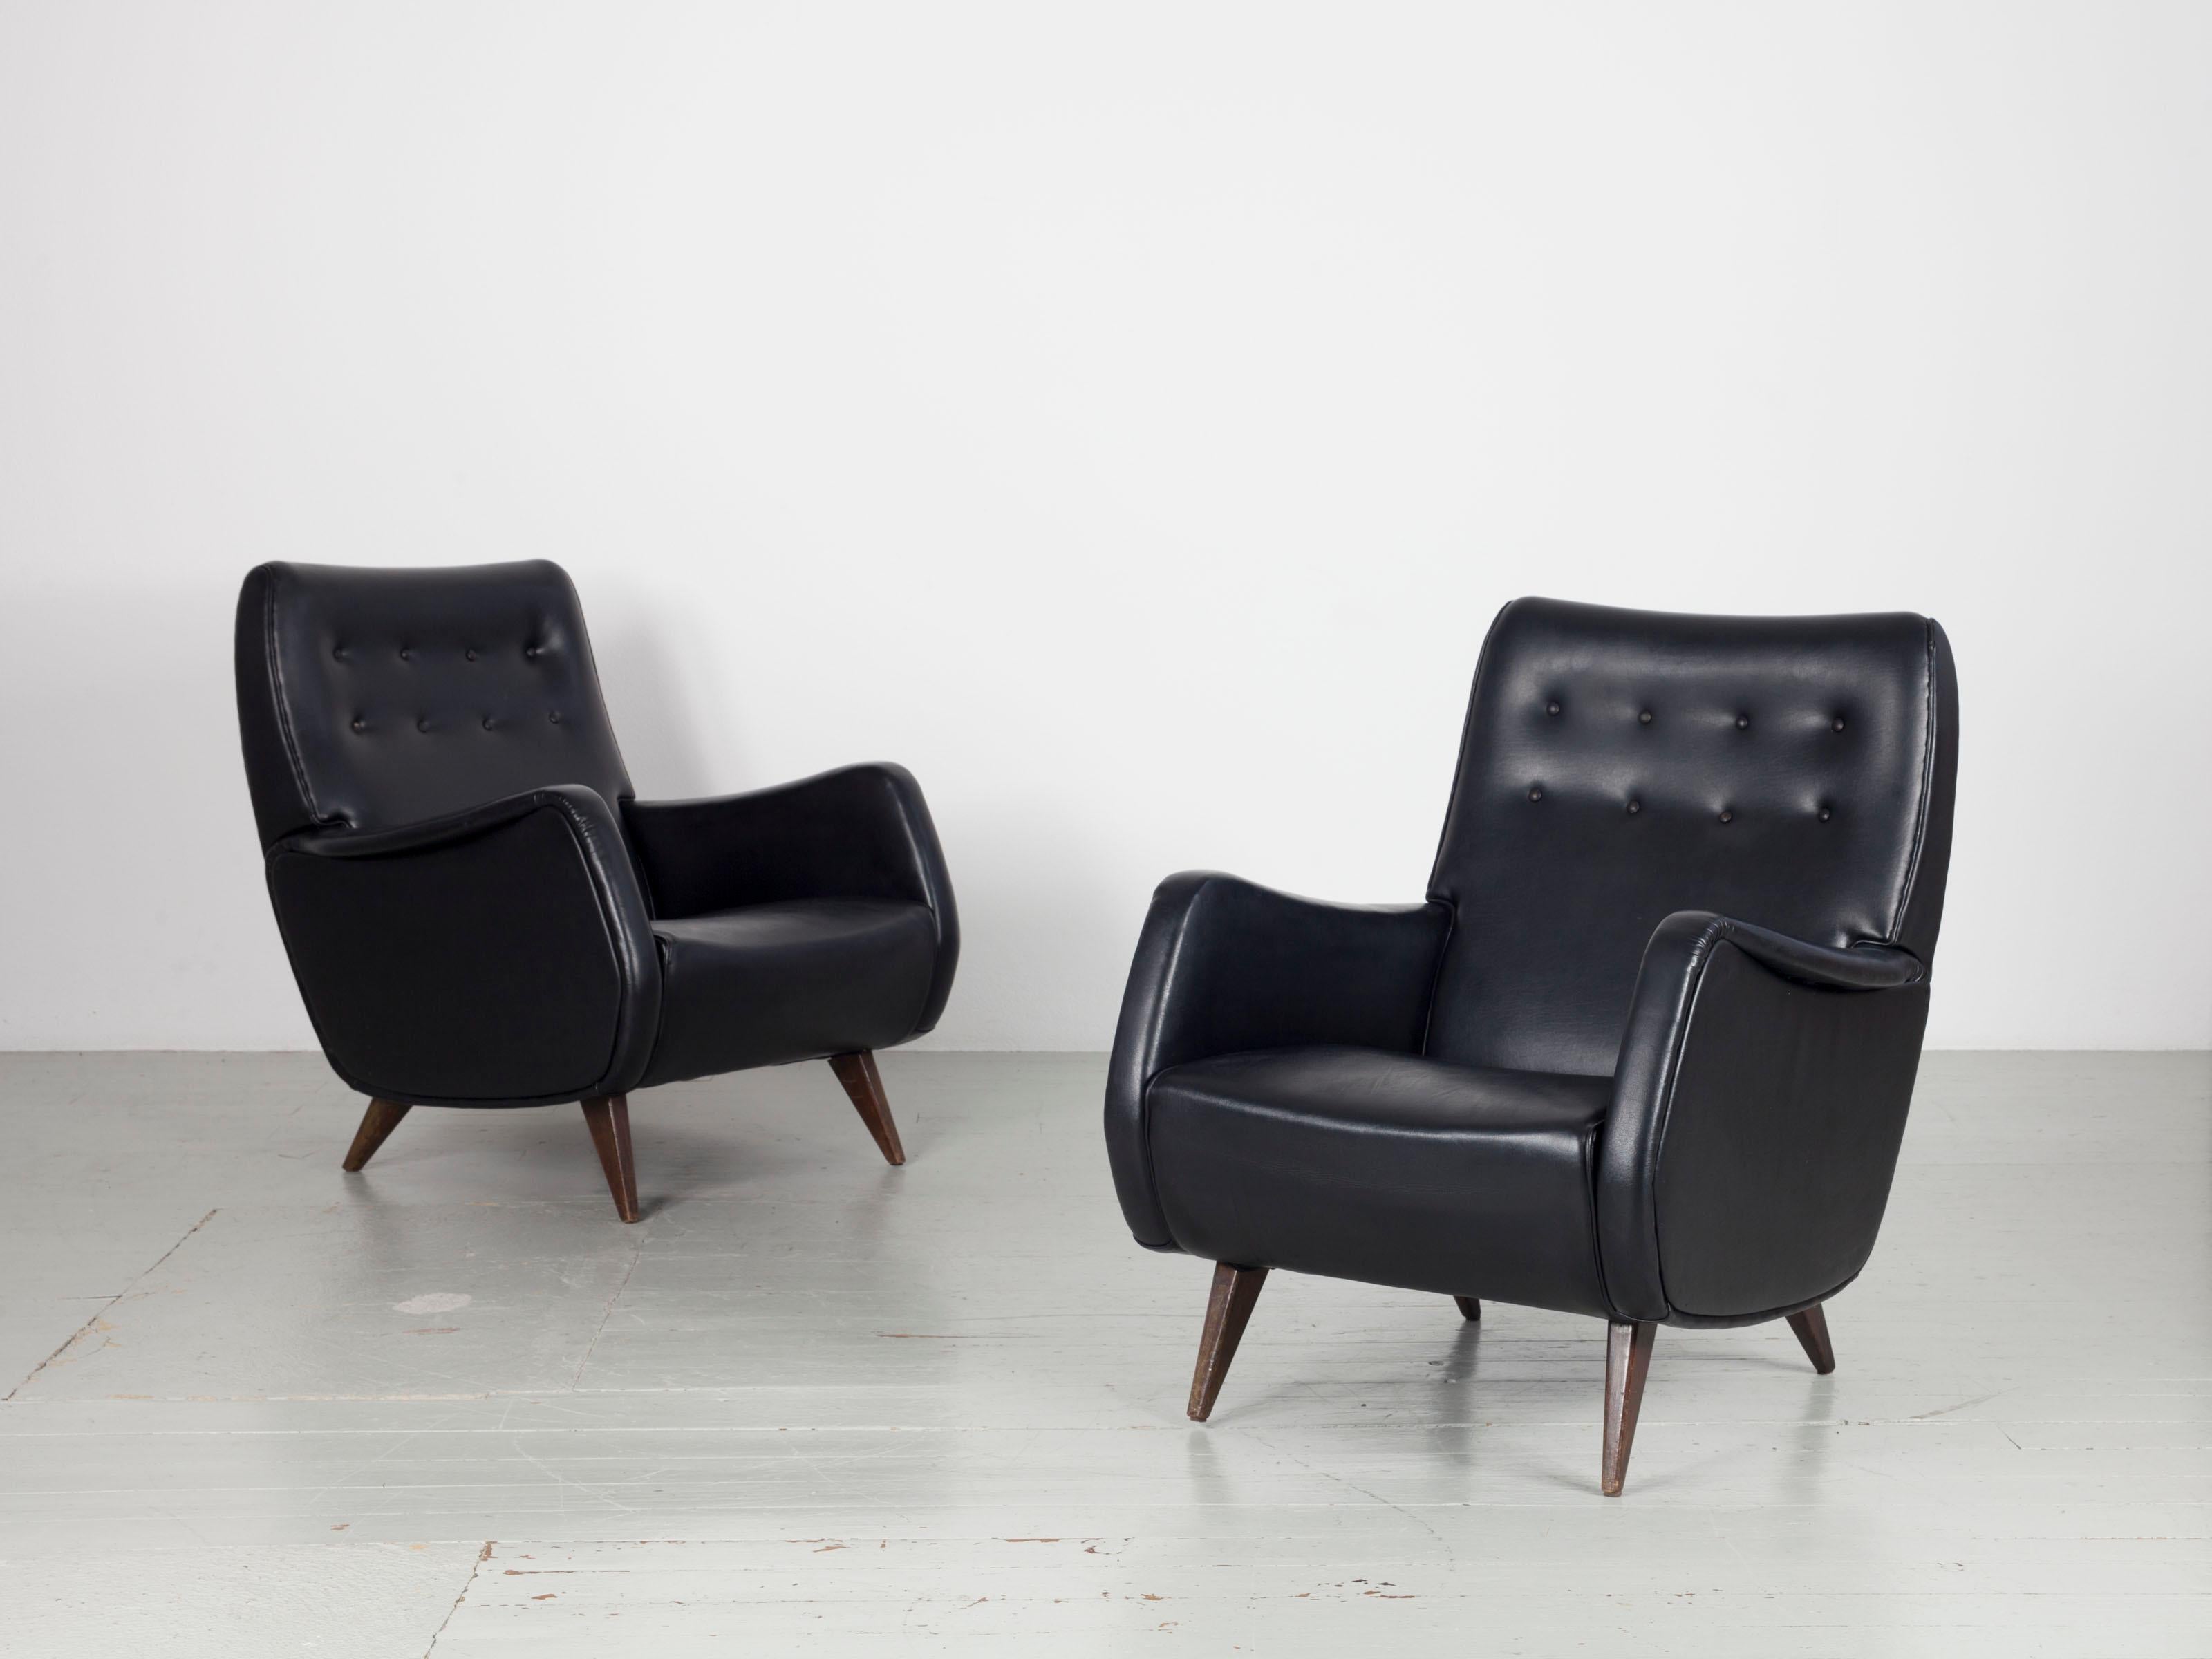 Set of Two Italian Armchairs in Original Black Leatherette Upholstery, 1950s For Sale 5